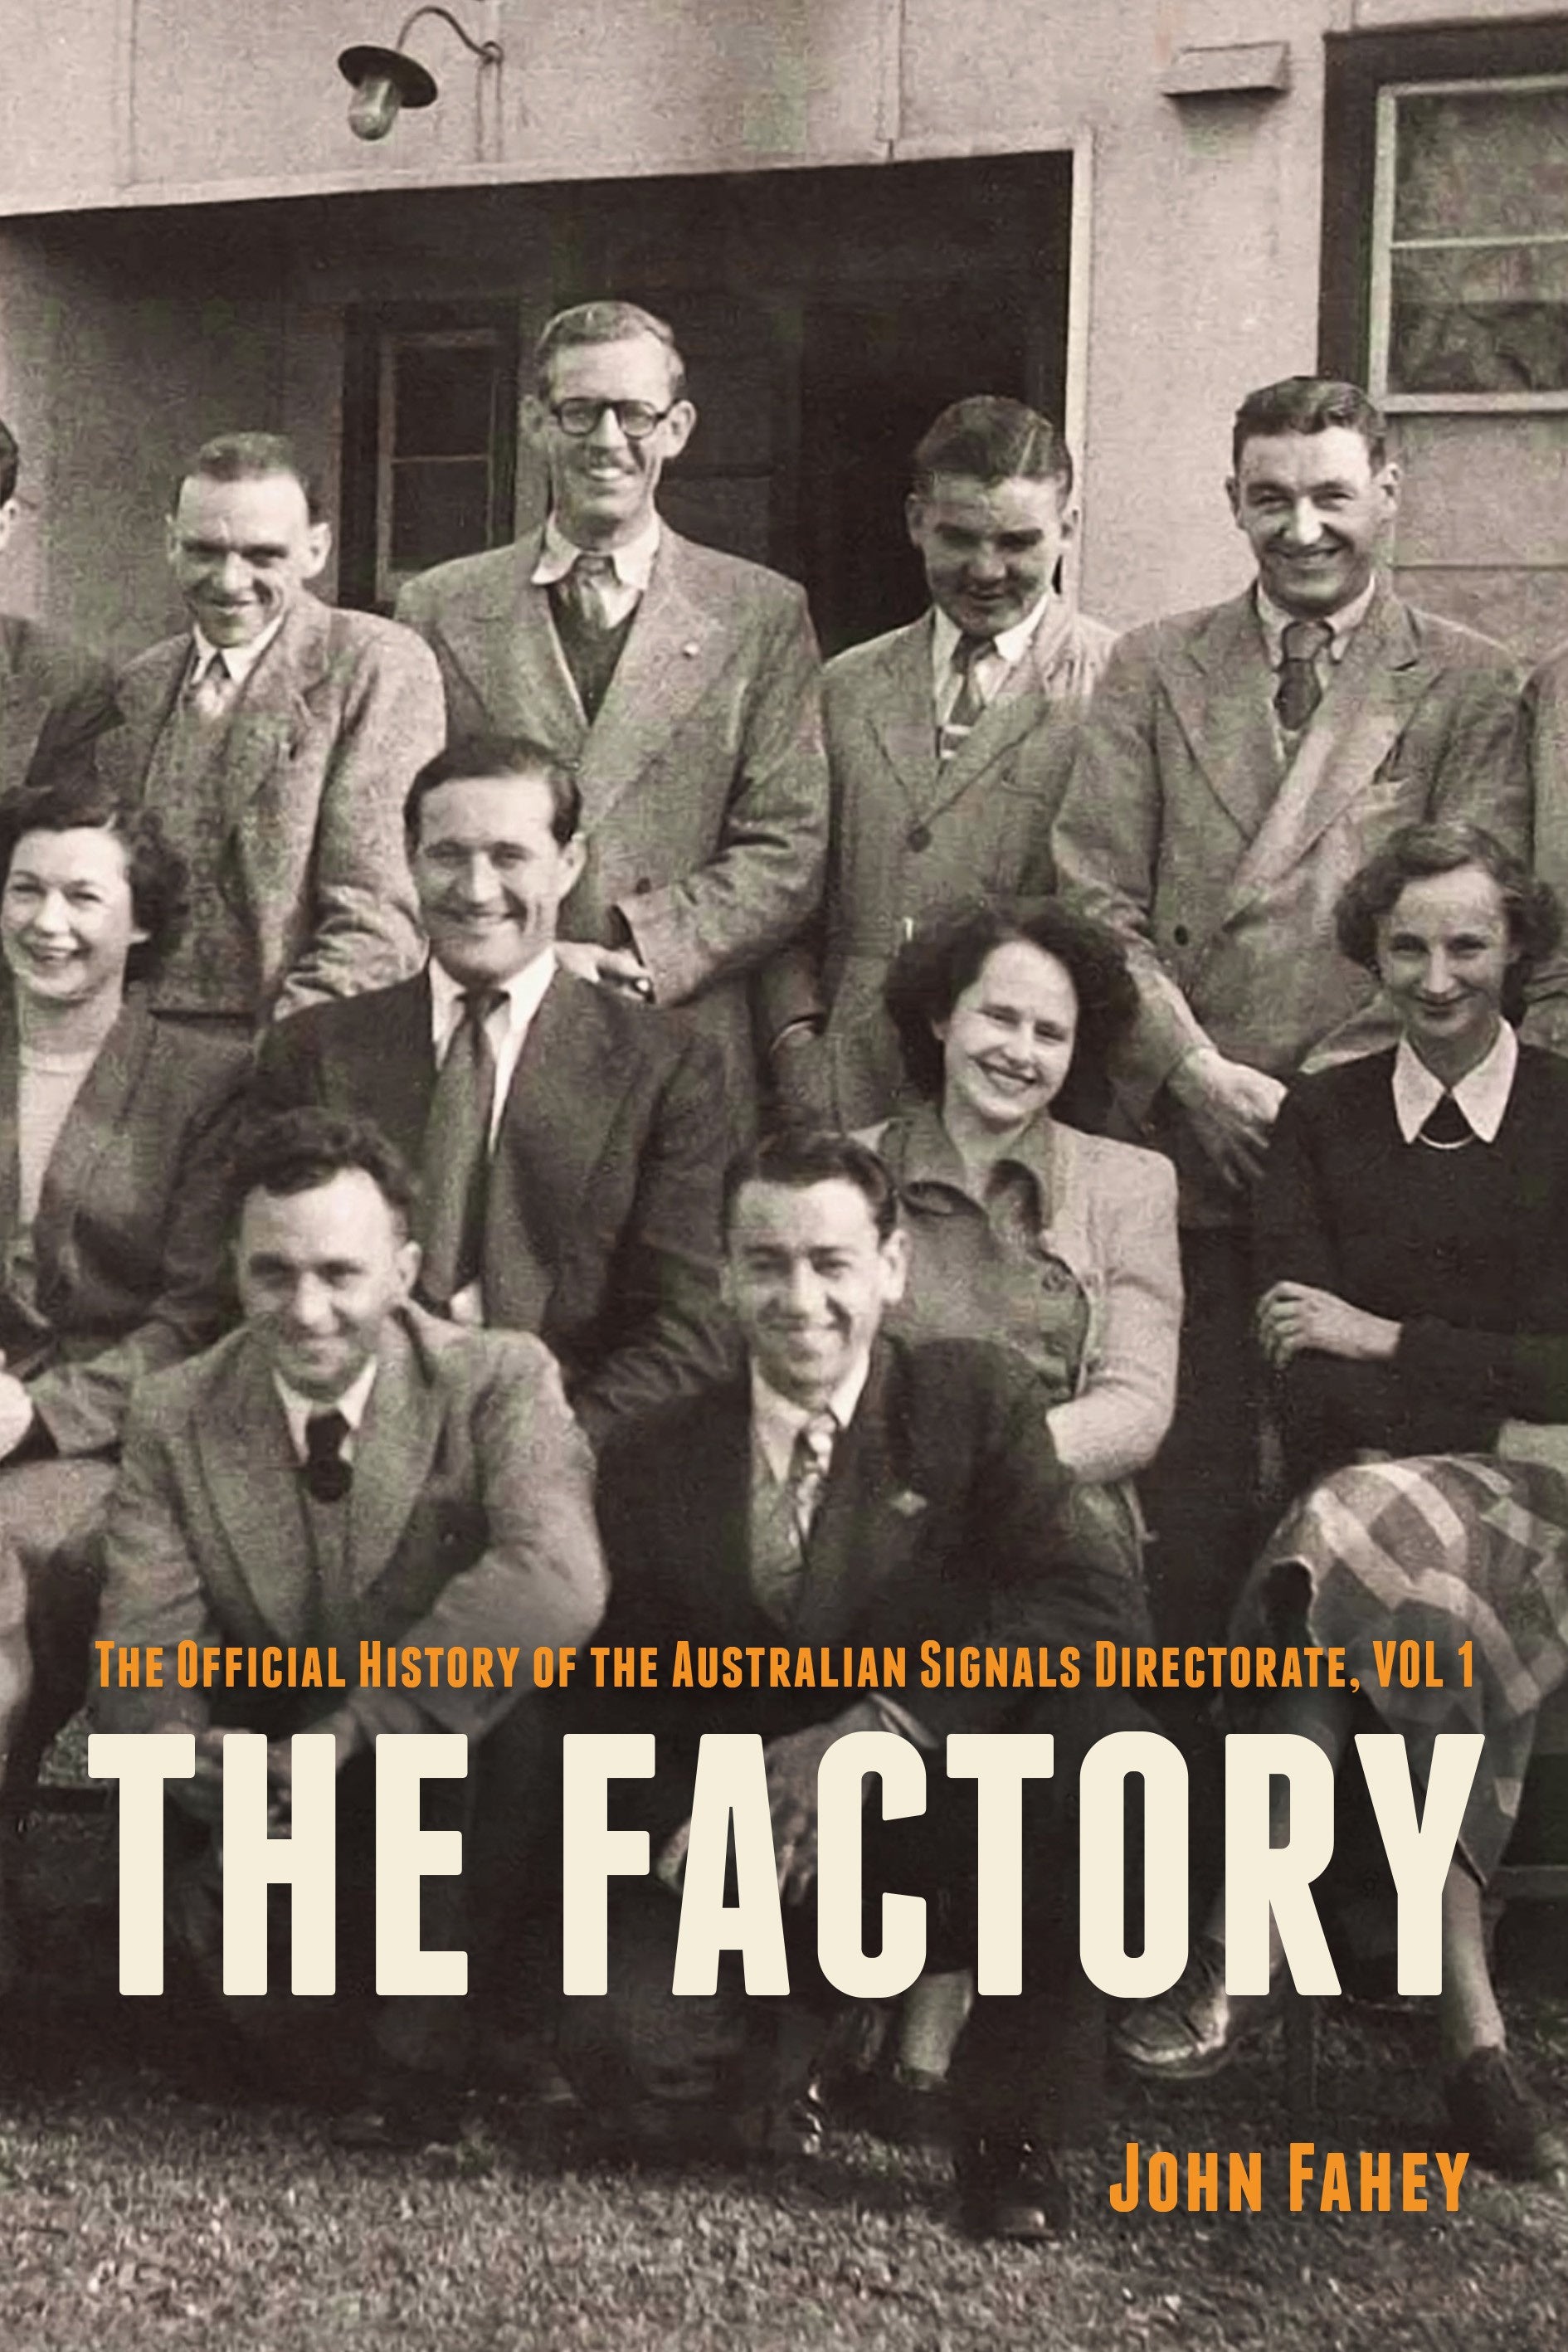 The factory: The official history of the Australian Signals Directorate, vol. 1